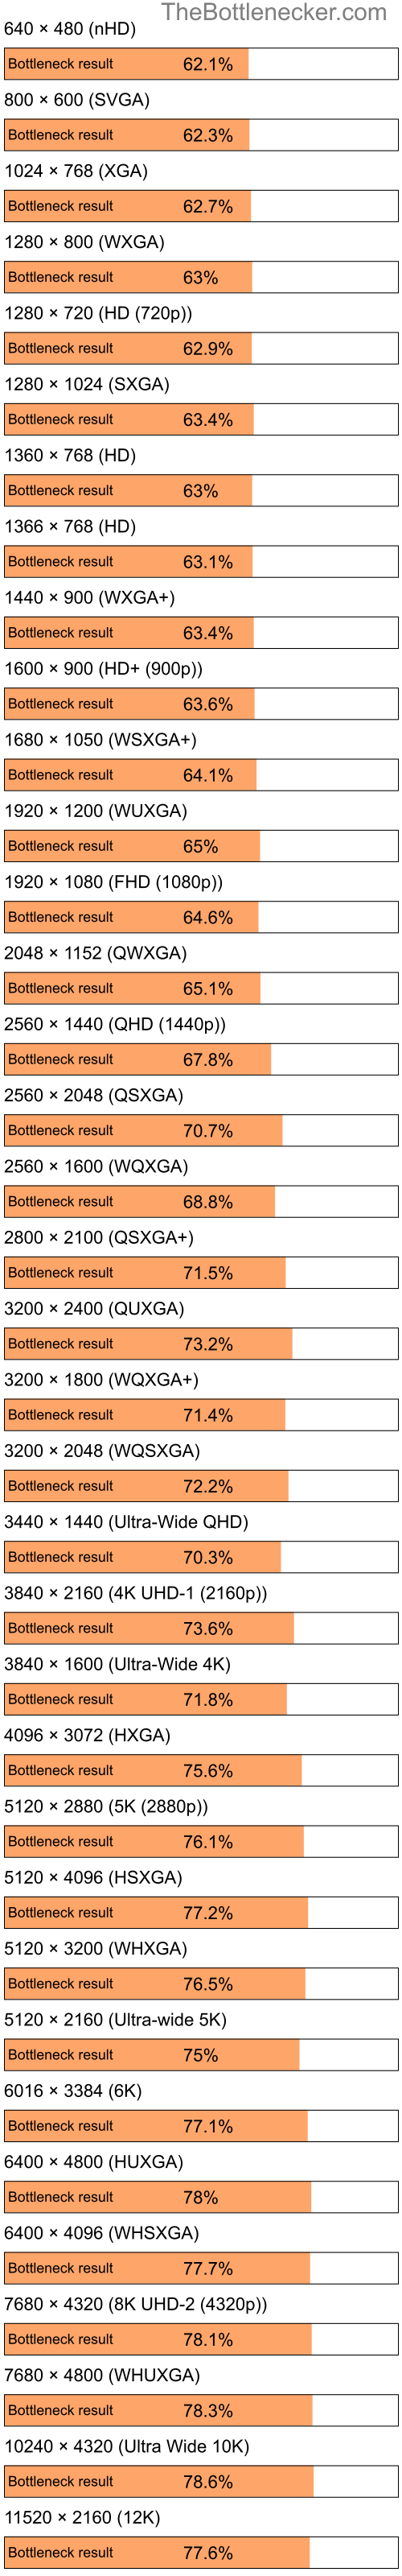 Bottleneck results by resolution for Intel Celeron M and AMD Mobility Radeon HD 3430 in General Tasks